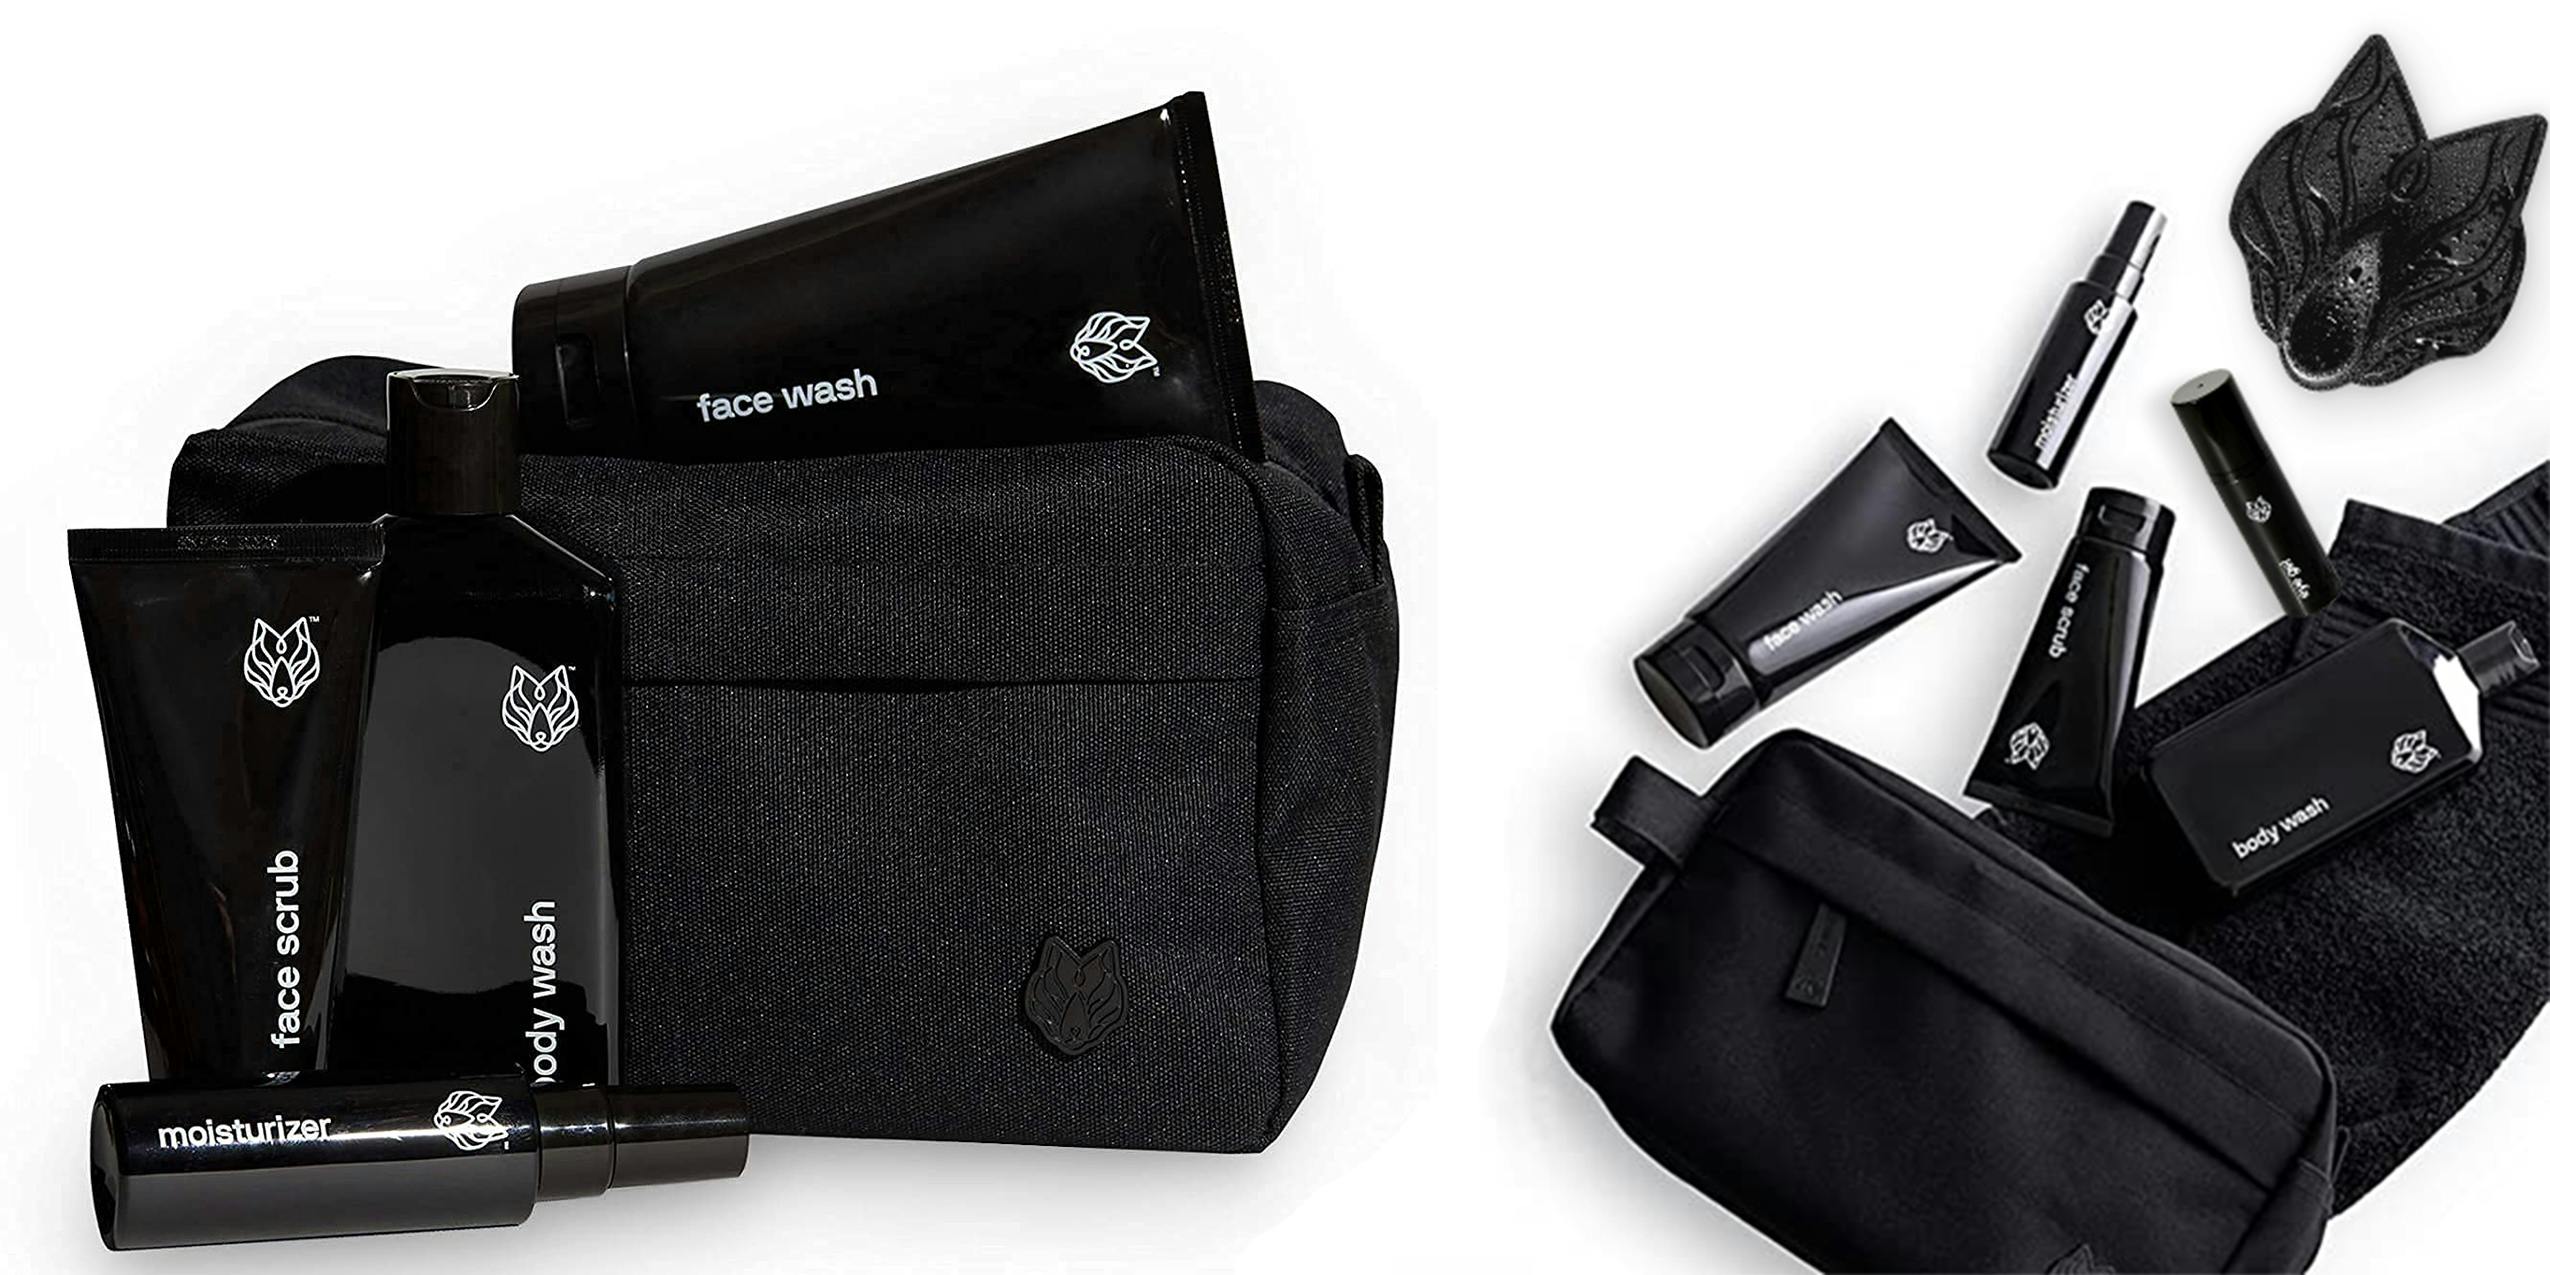 The full Black Wolf skincare package complete with microfiber sponge, towel, and carrying case.